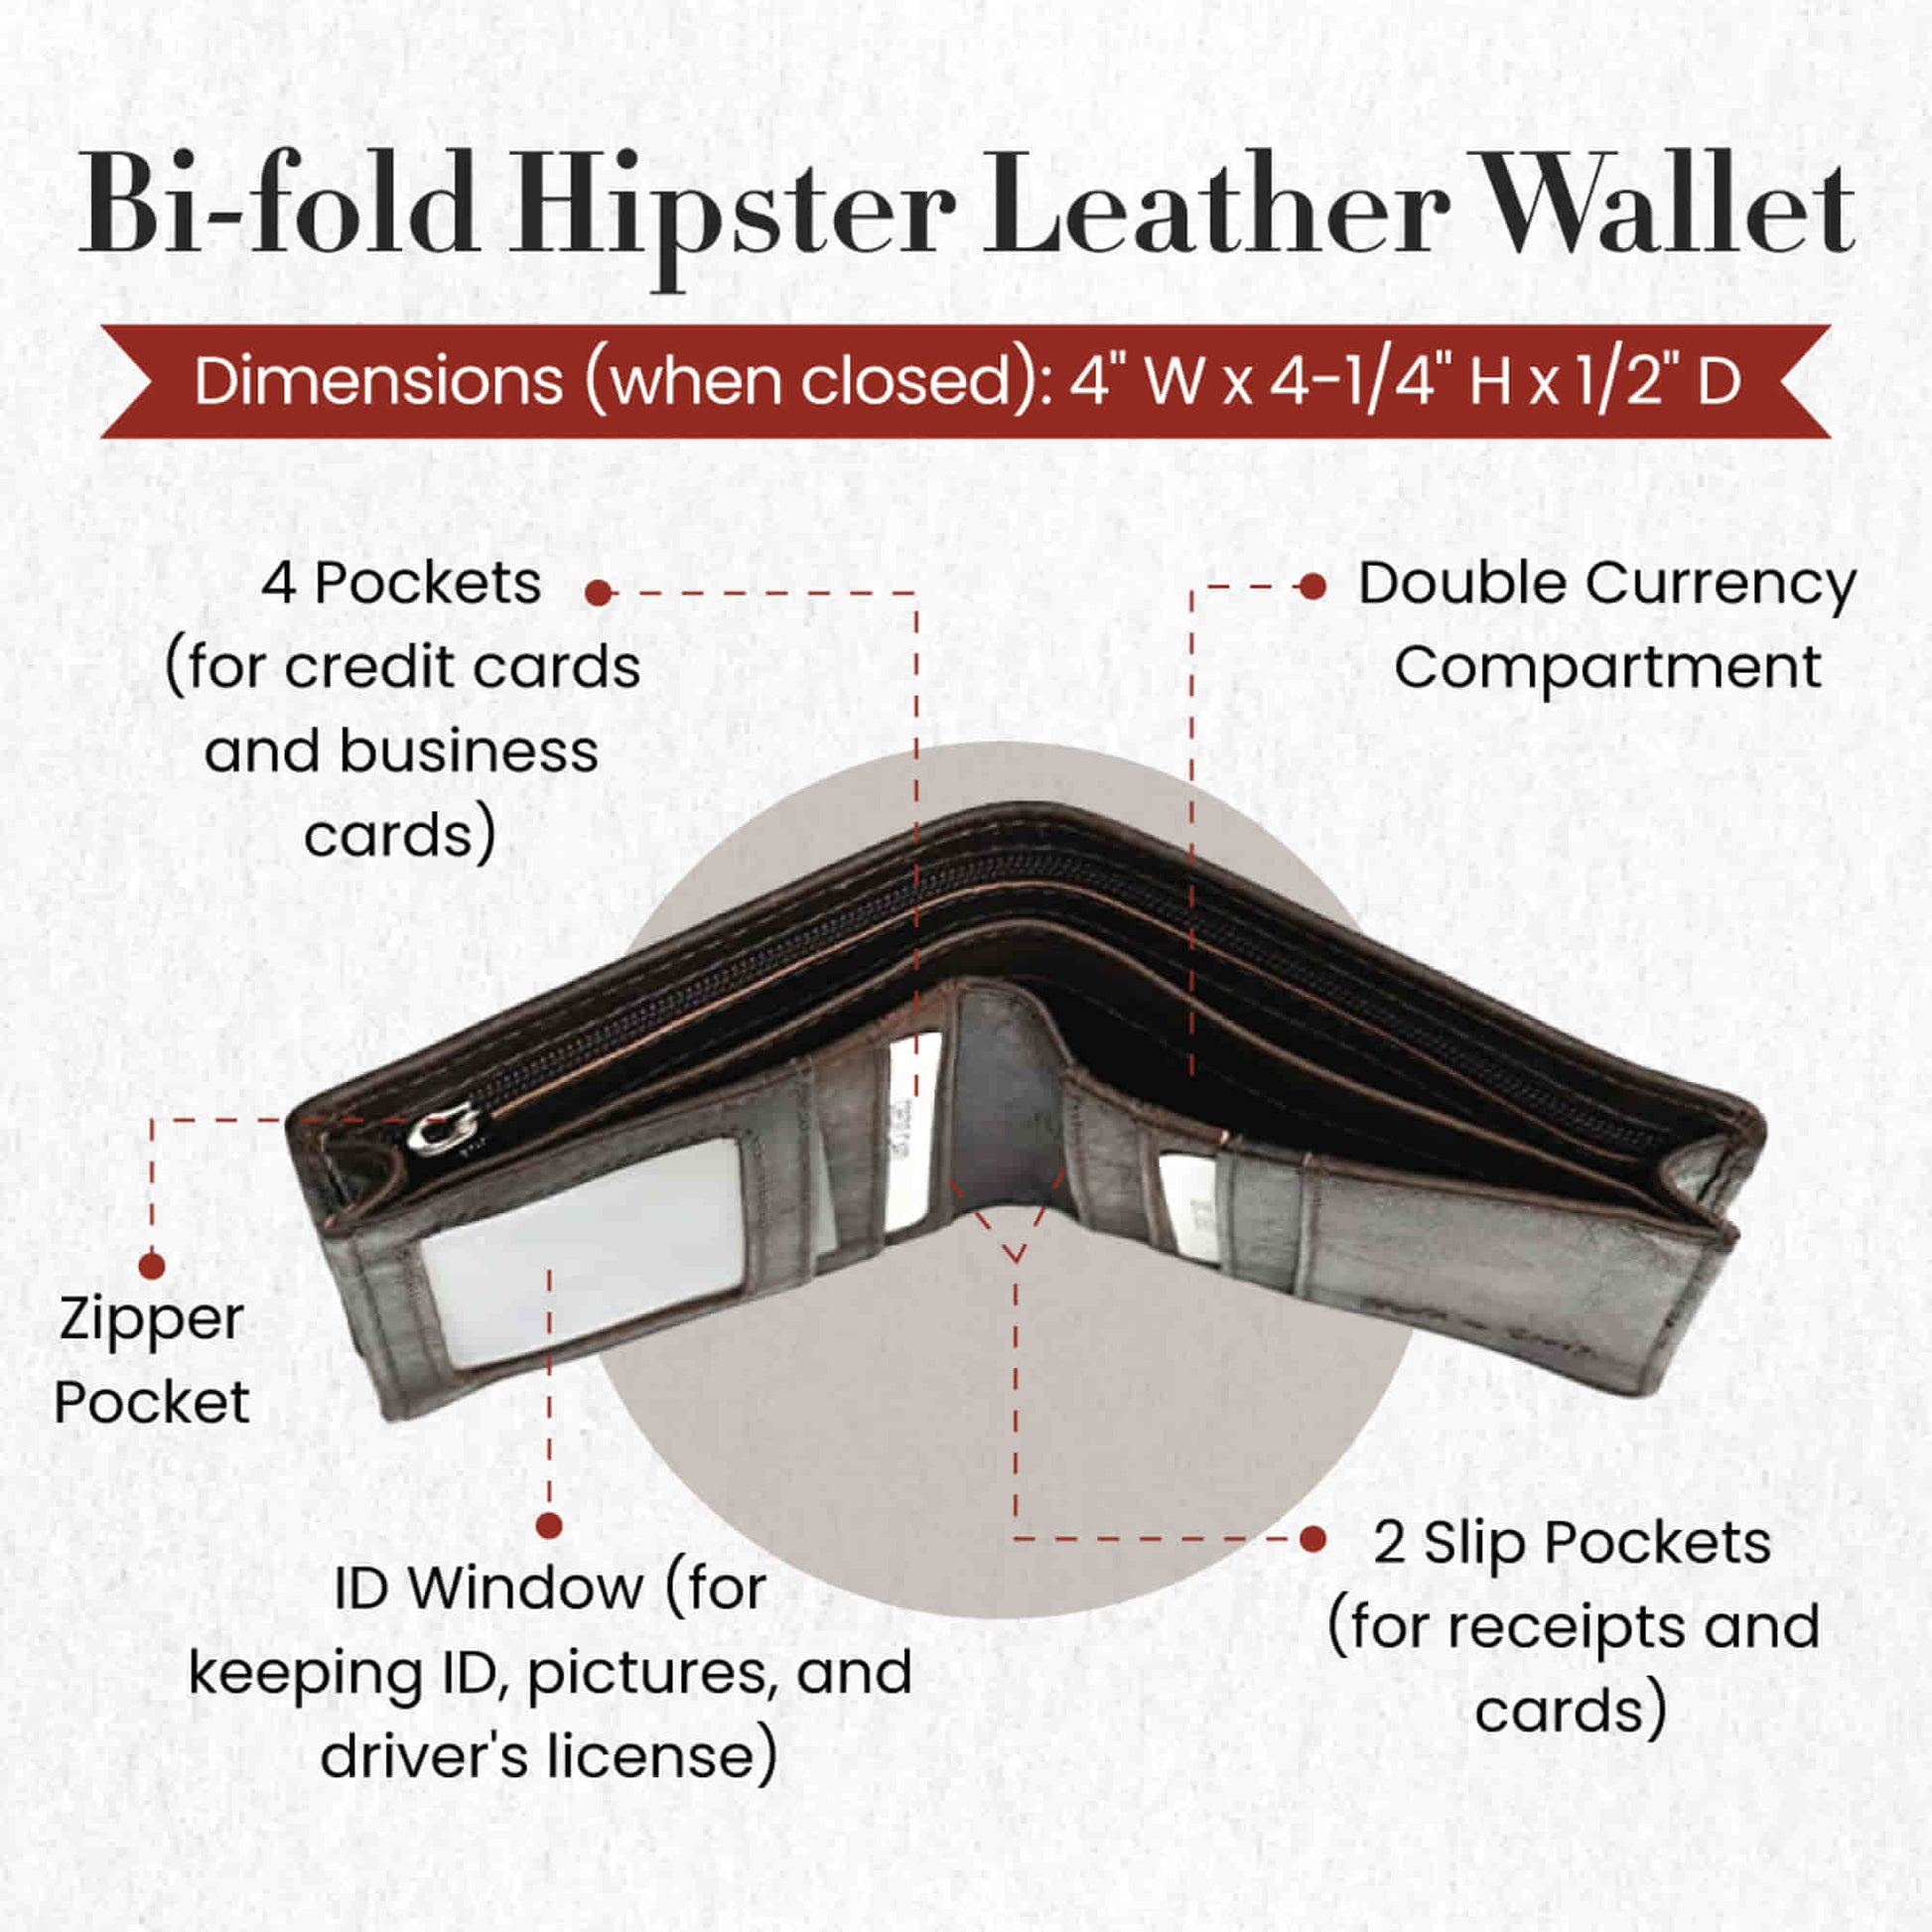 Style n Craft 391006 Bifold Hipster Leather Wallet with Back Zipper in Dark Brown Color - Open View Showing the Details